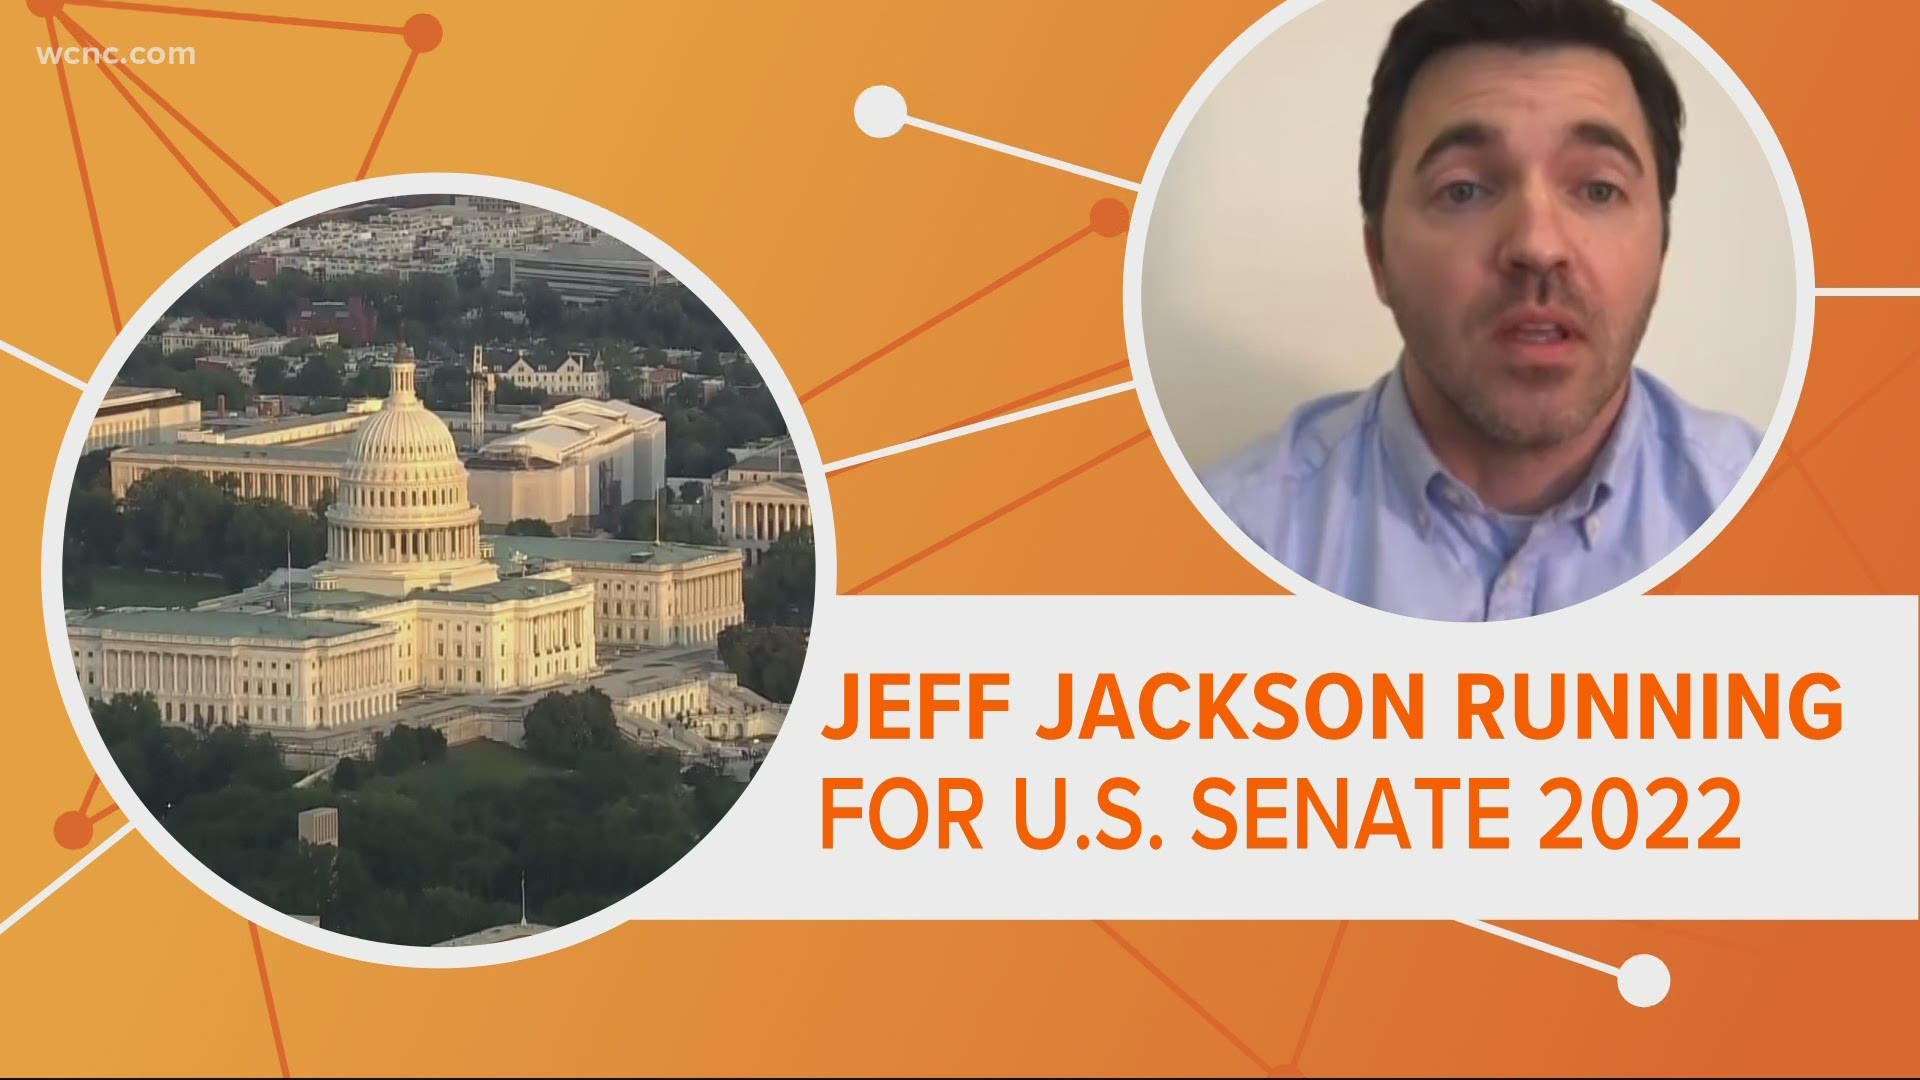 Charlotte Democrat Jeff Jackson announced he's running for US Congress in 2022. Despite the race being over a year away, he's not the 1st -- or 2nd -- person to run.